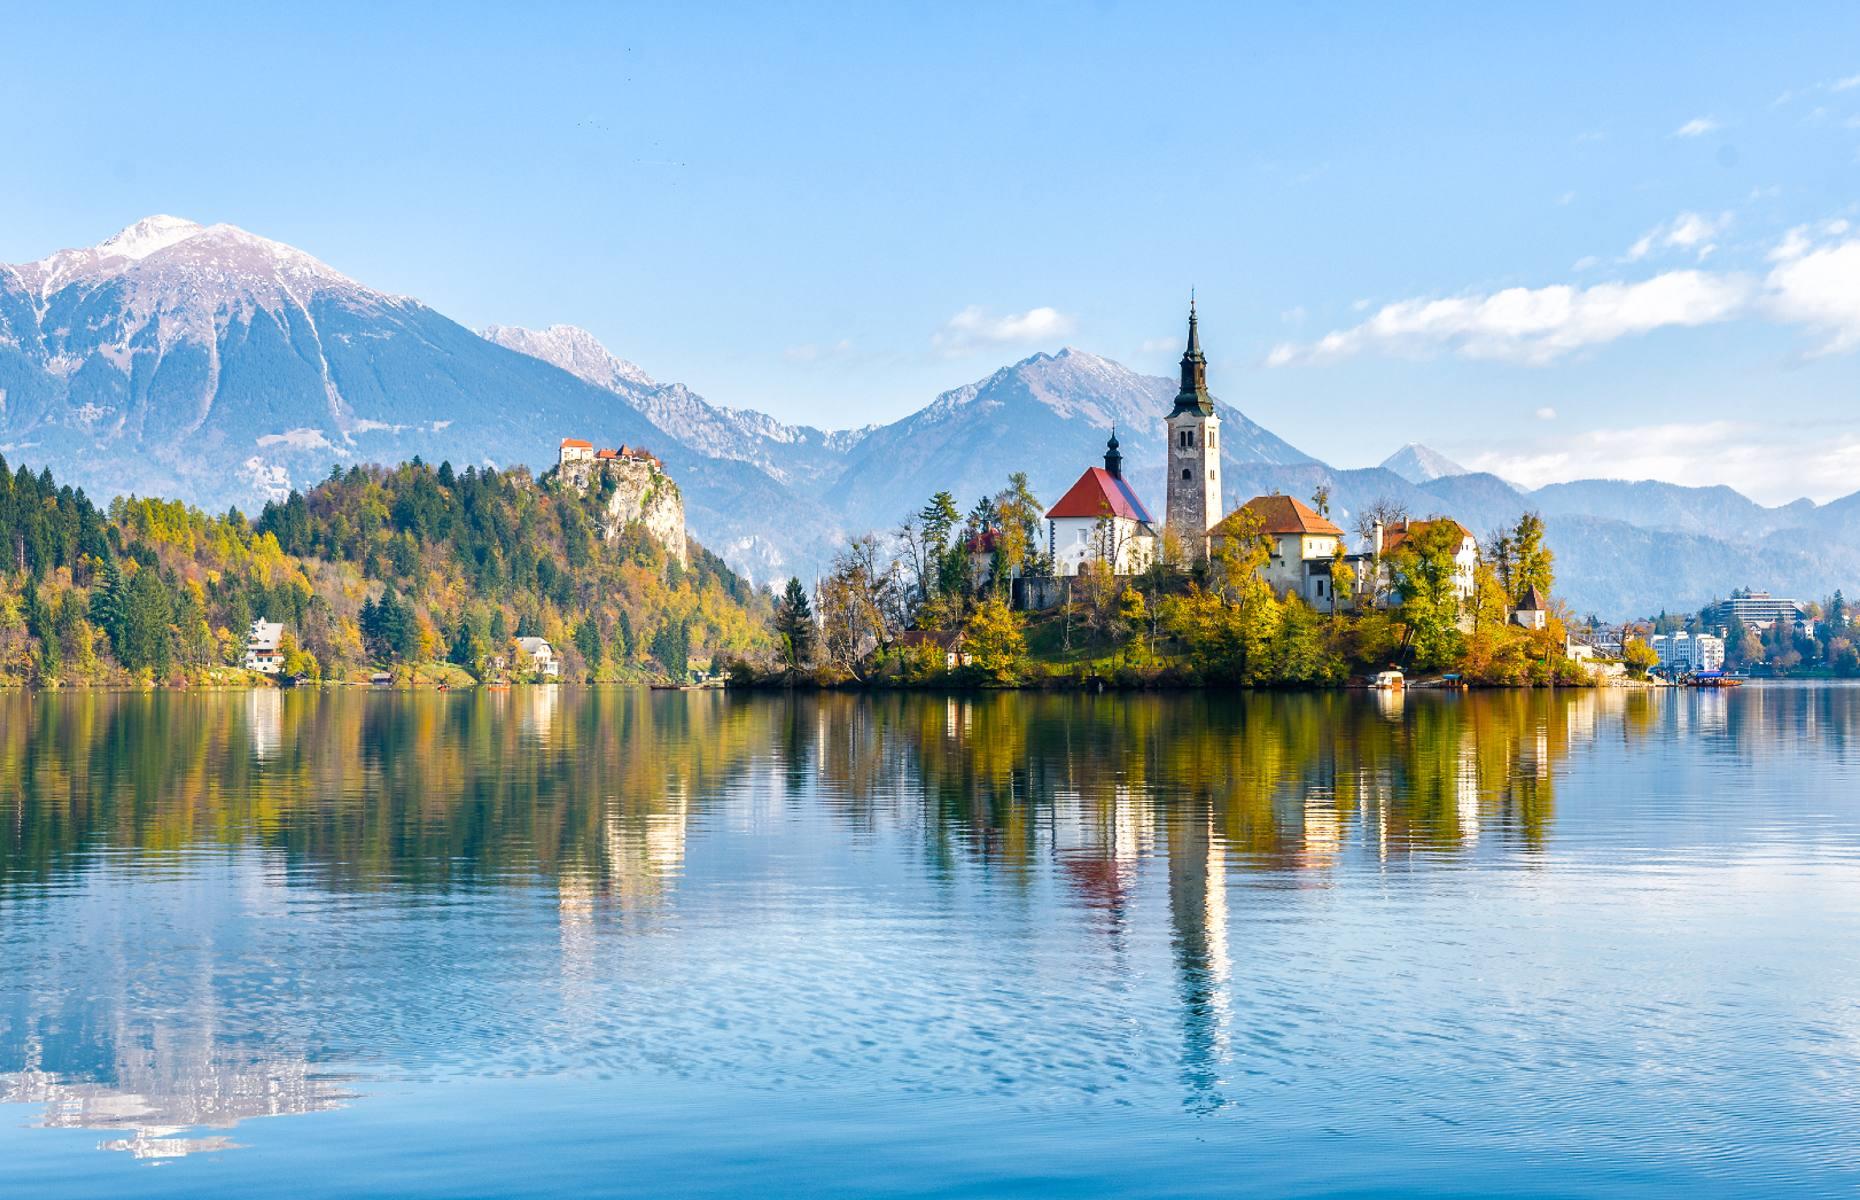 <p>Among the most popular sights is Lake Bled (pictured), an emerald-green lake with a dinky island topped by a 17th-century church. <a href="https://www.loveexploring.com/guides/106237/explore-ljubljana-slovenia-europe-city-breaks-hotels-2021">Ljubljana</a>, the capital, is another must-visit thanks to its historic architecture and medieval squares, while outdoorsy types should head to Triglav National Park for scenic trails through virgin forests and alpine peaks.</p>